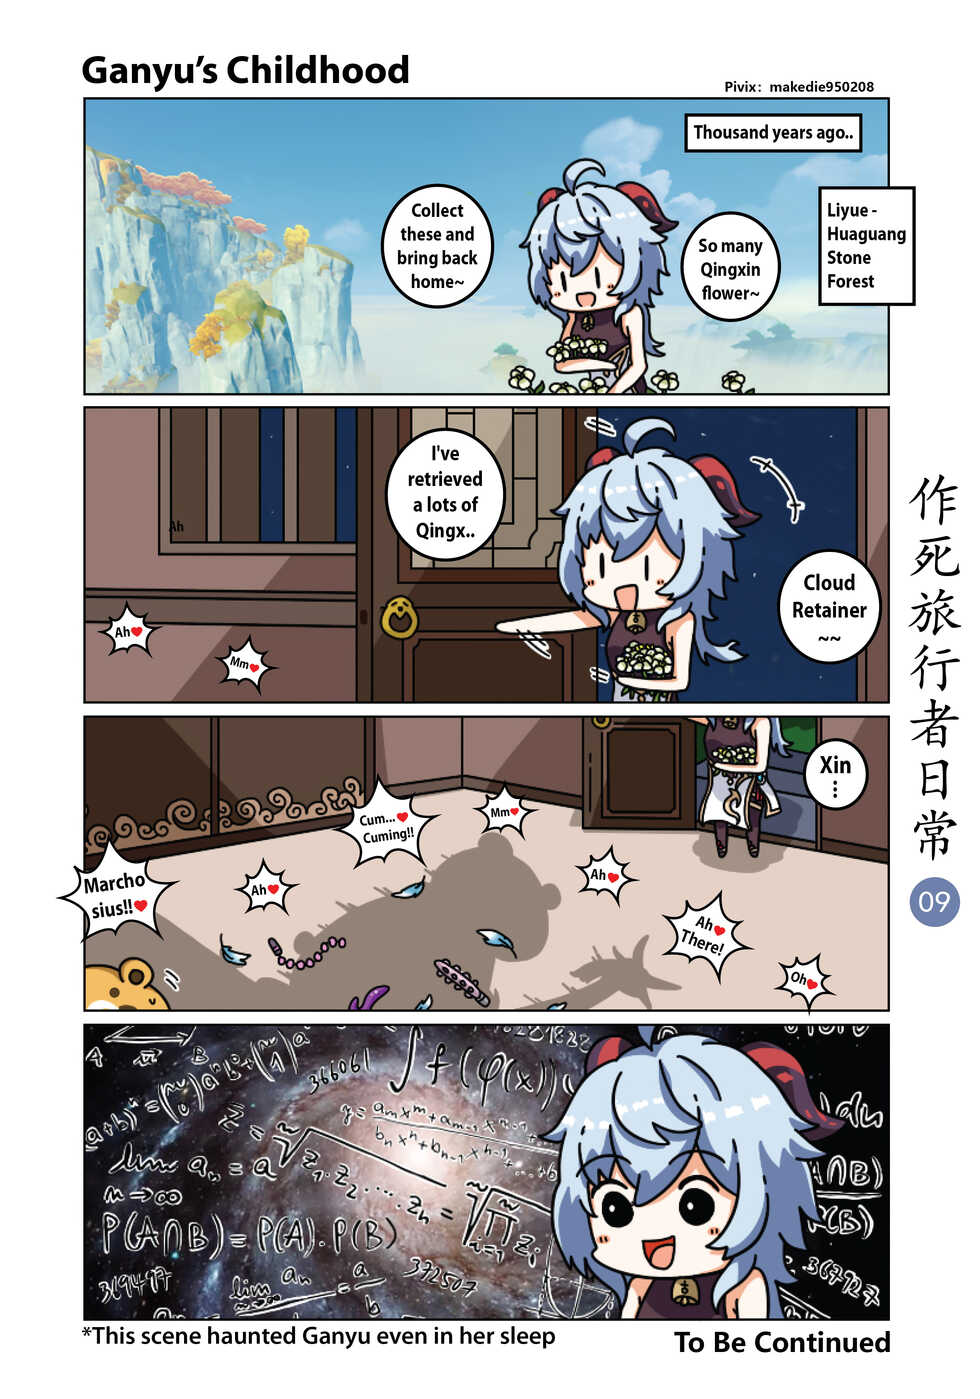 [makedie950208] Dead Traveler Daily [english] - Page 9